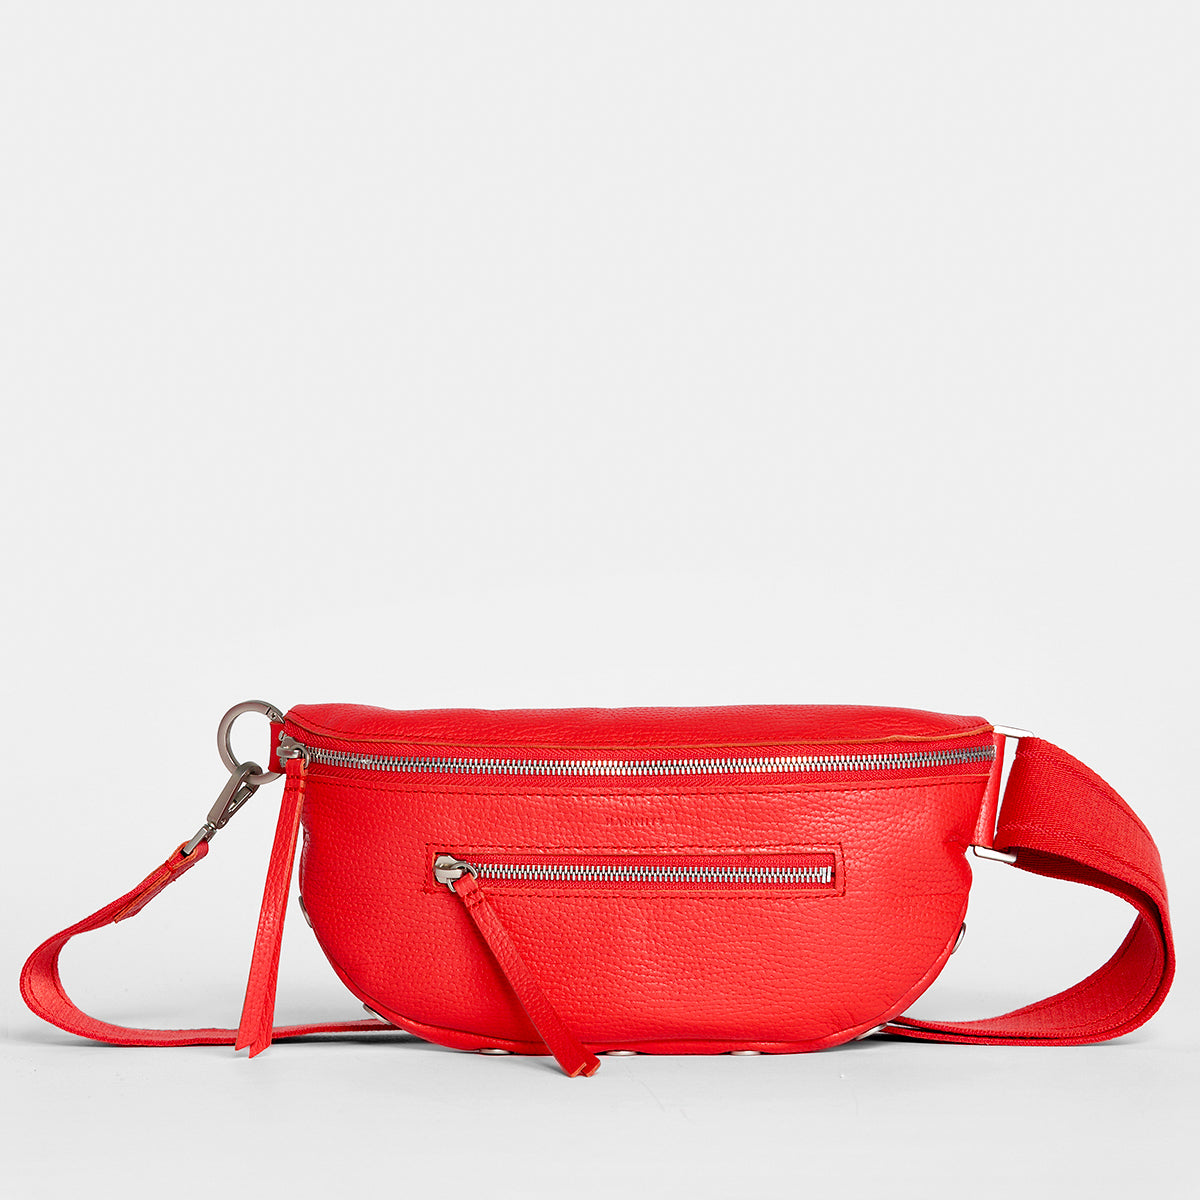 Charles-Crossbody-Med-Lighthouse-Red-Front-View